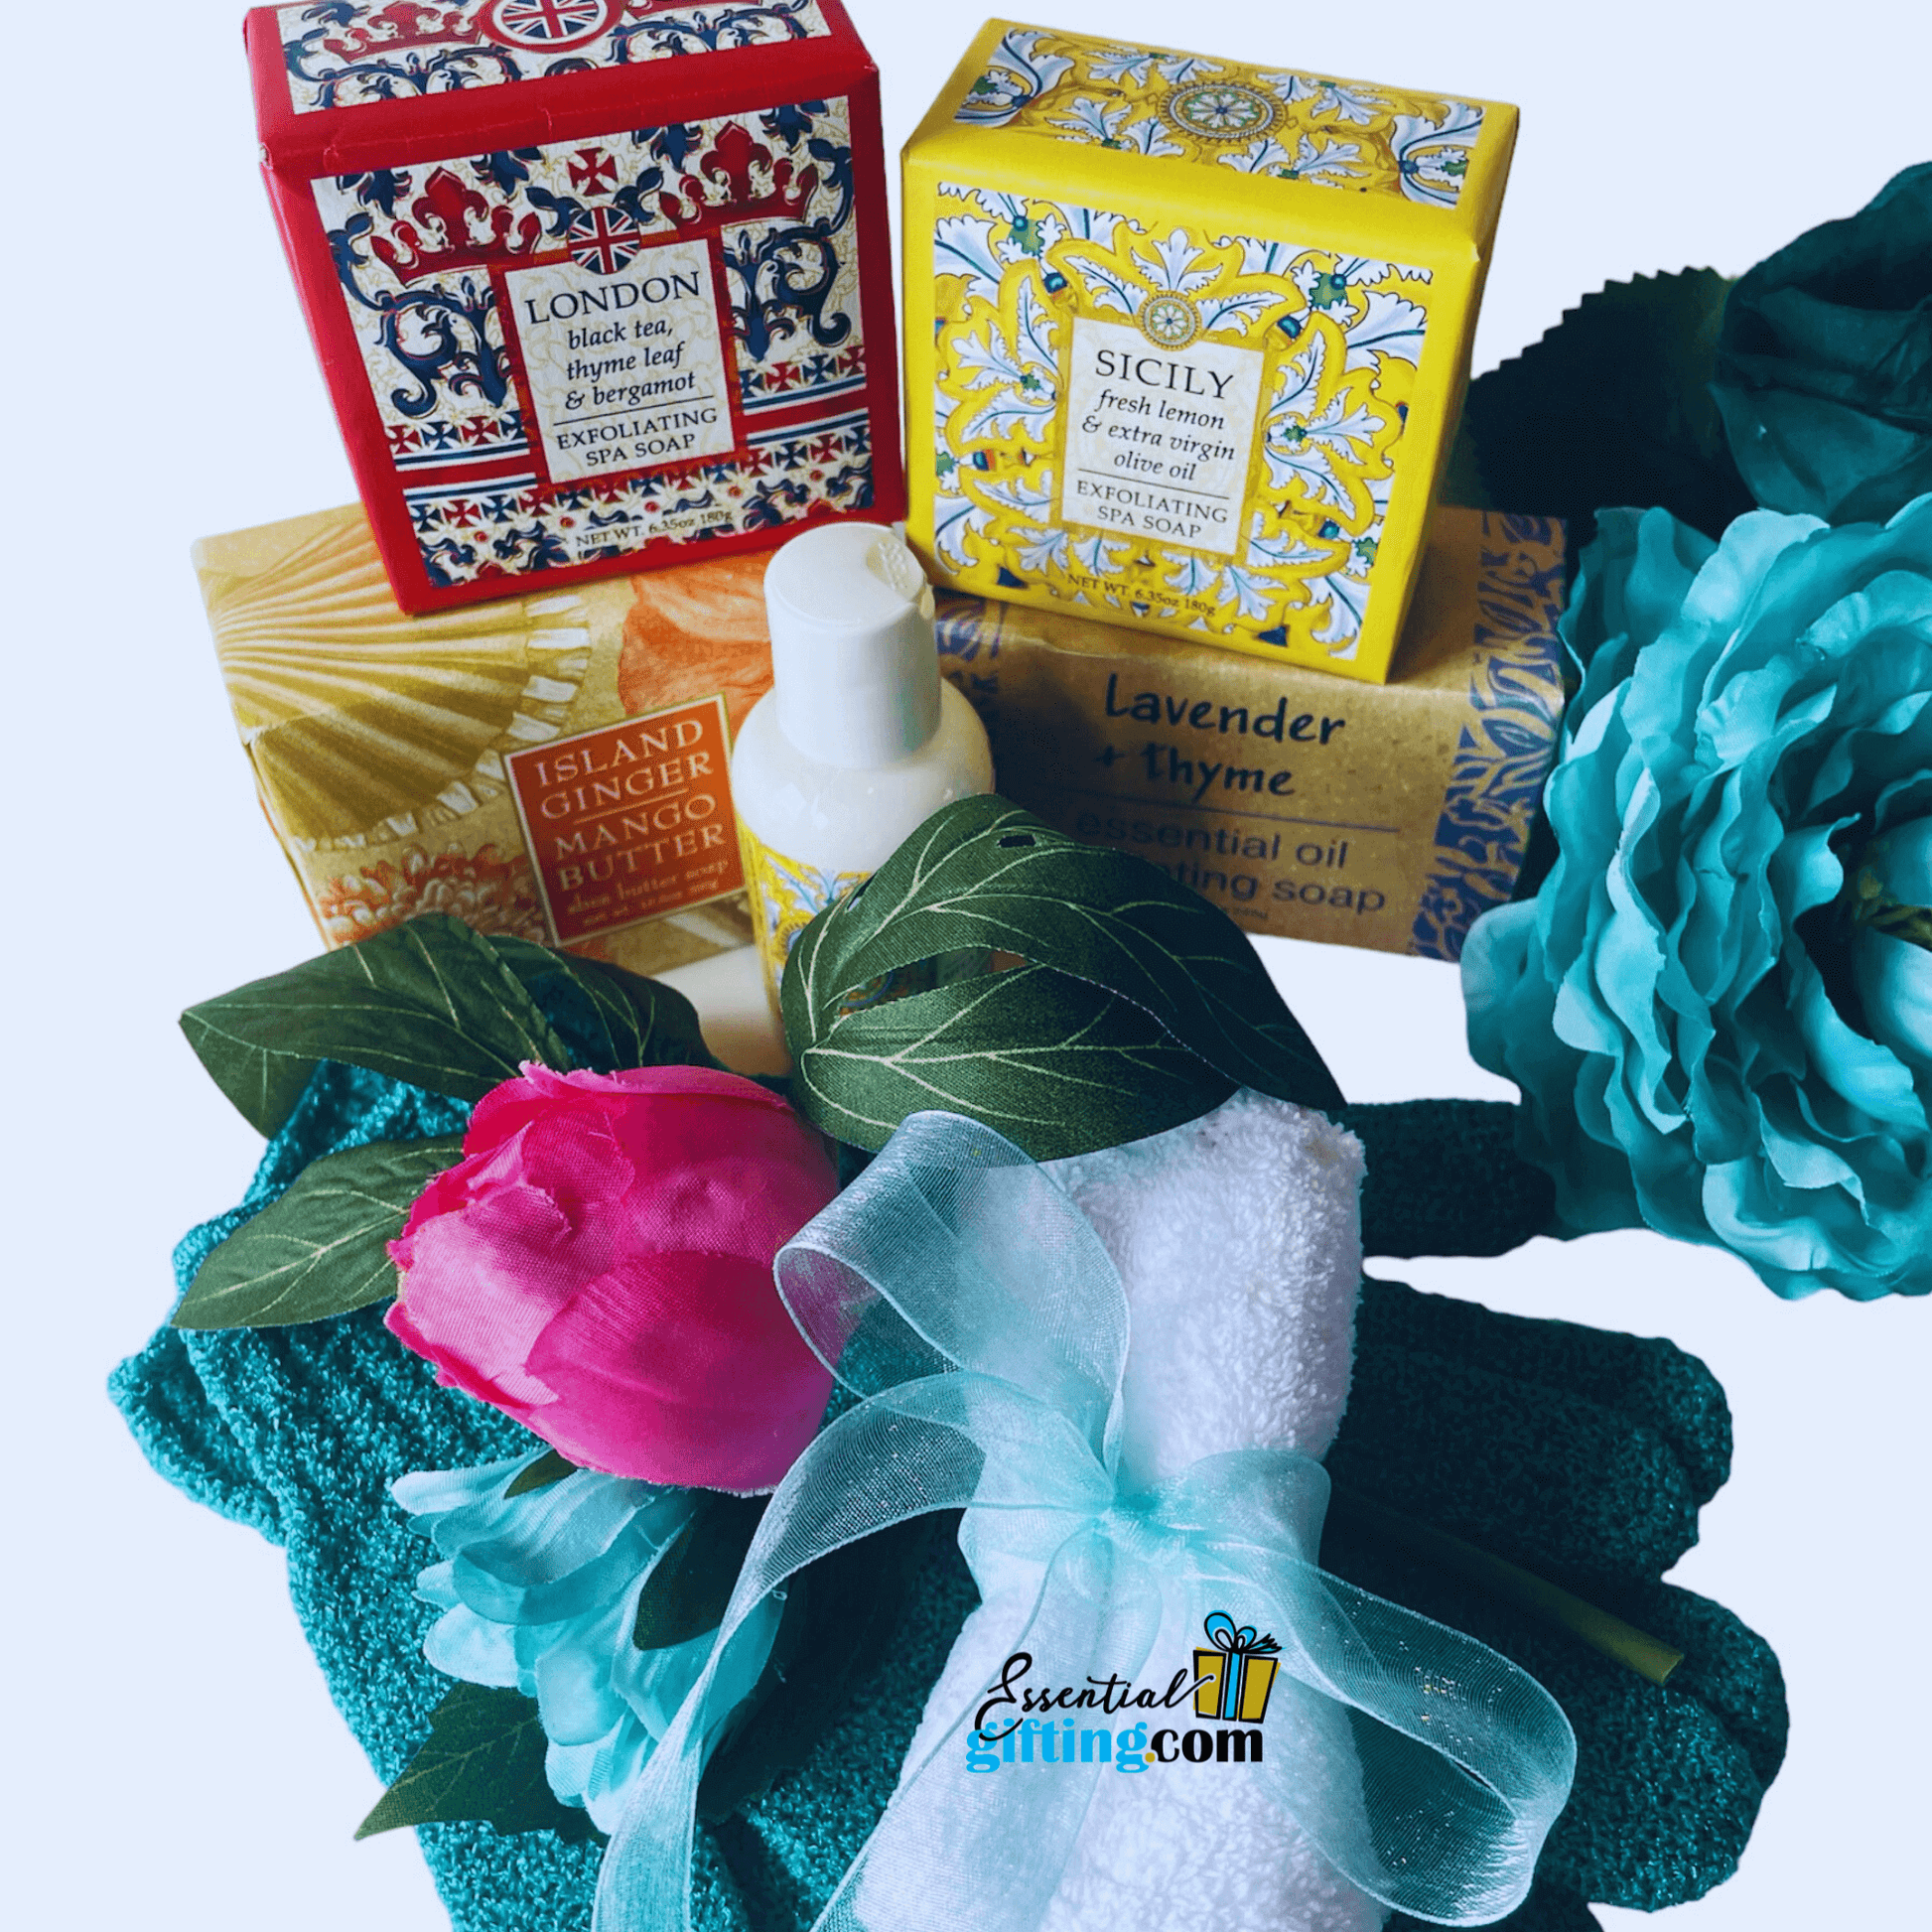 Soothing bath essentials bundle with floral accents, featuring scented soap bars, bath salts, and decorative elements.